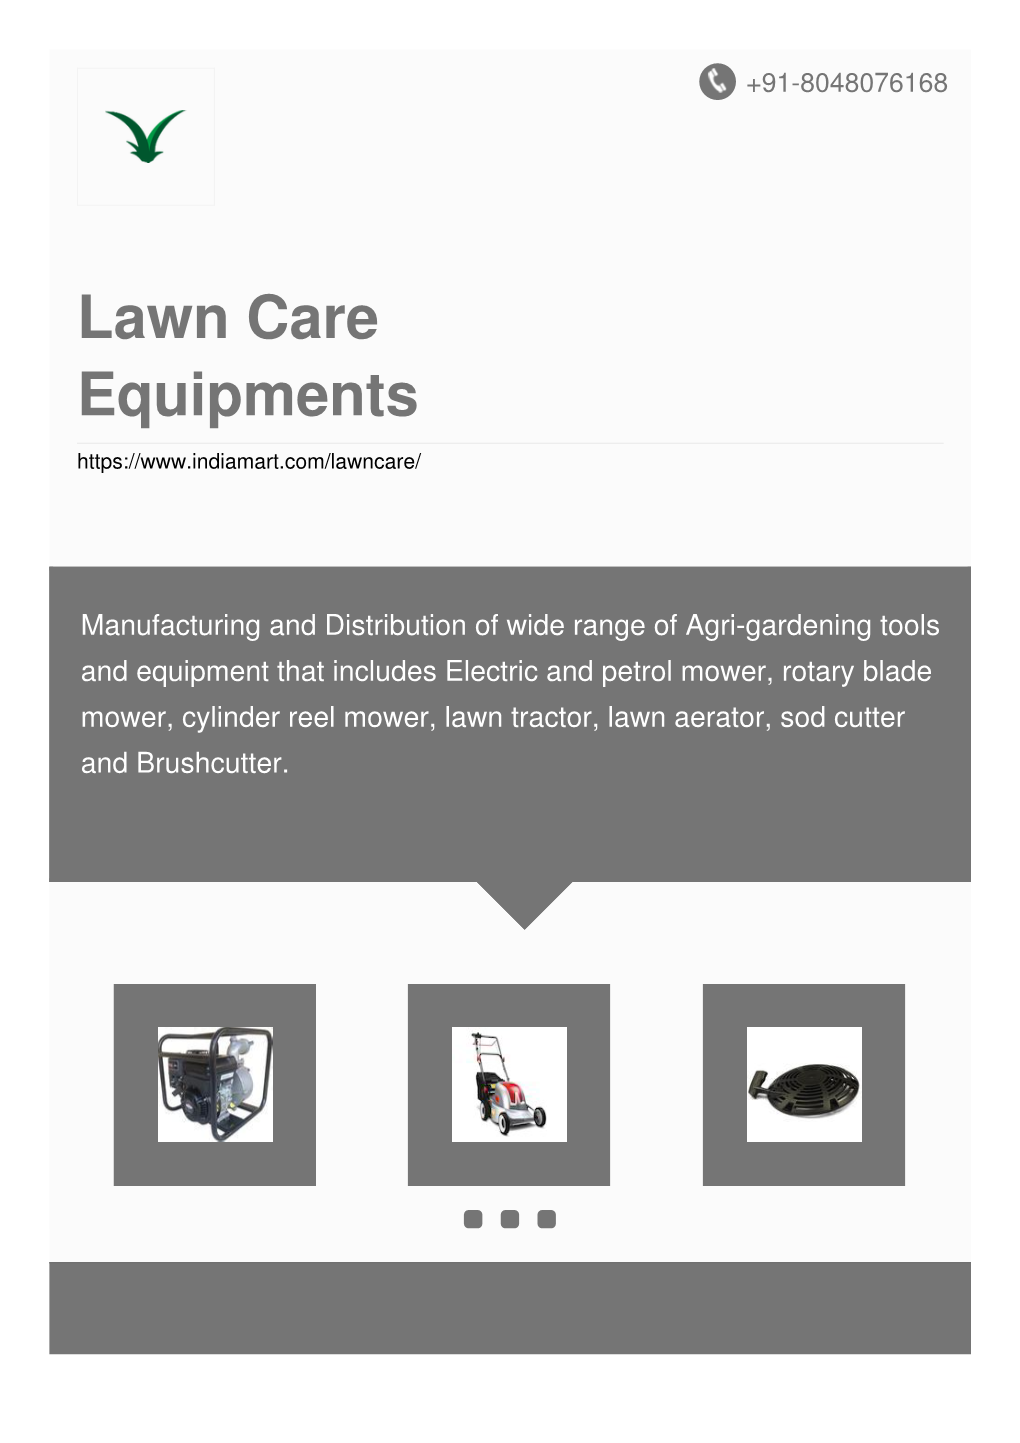 Lawn Care Equipments